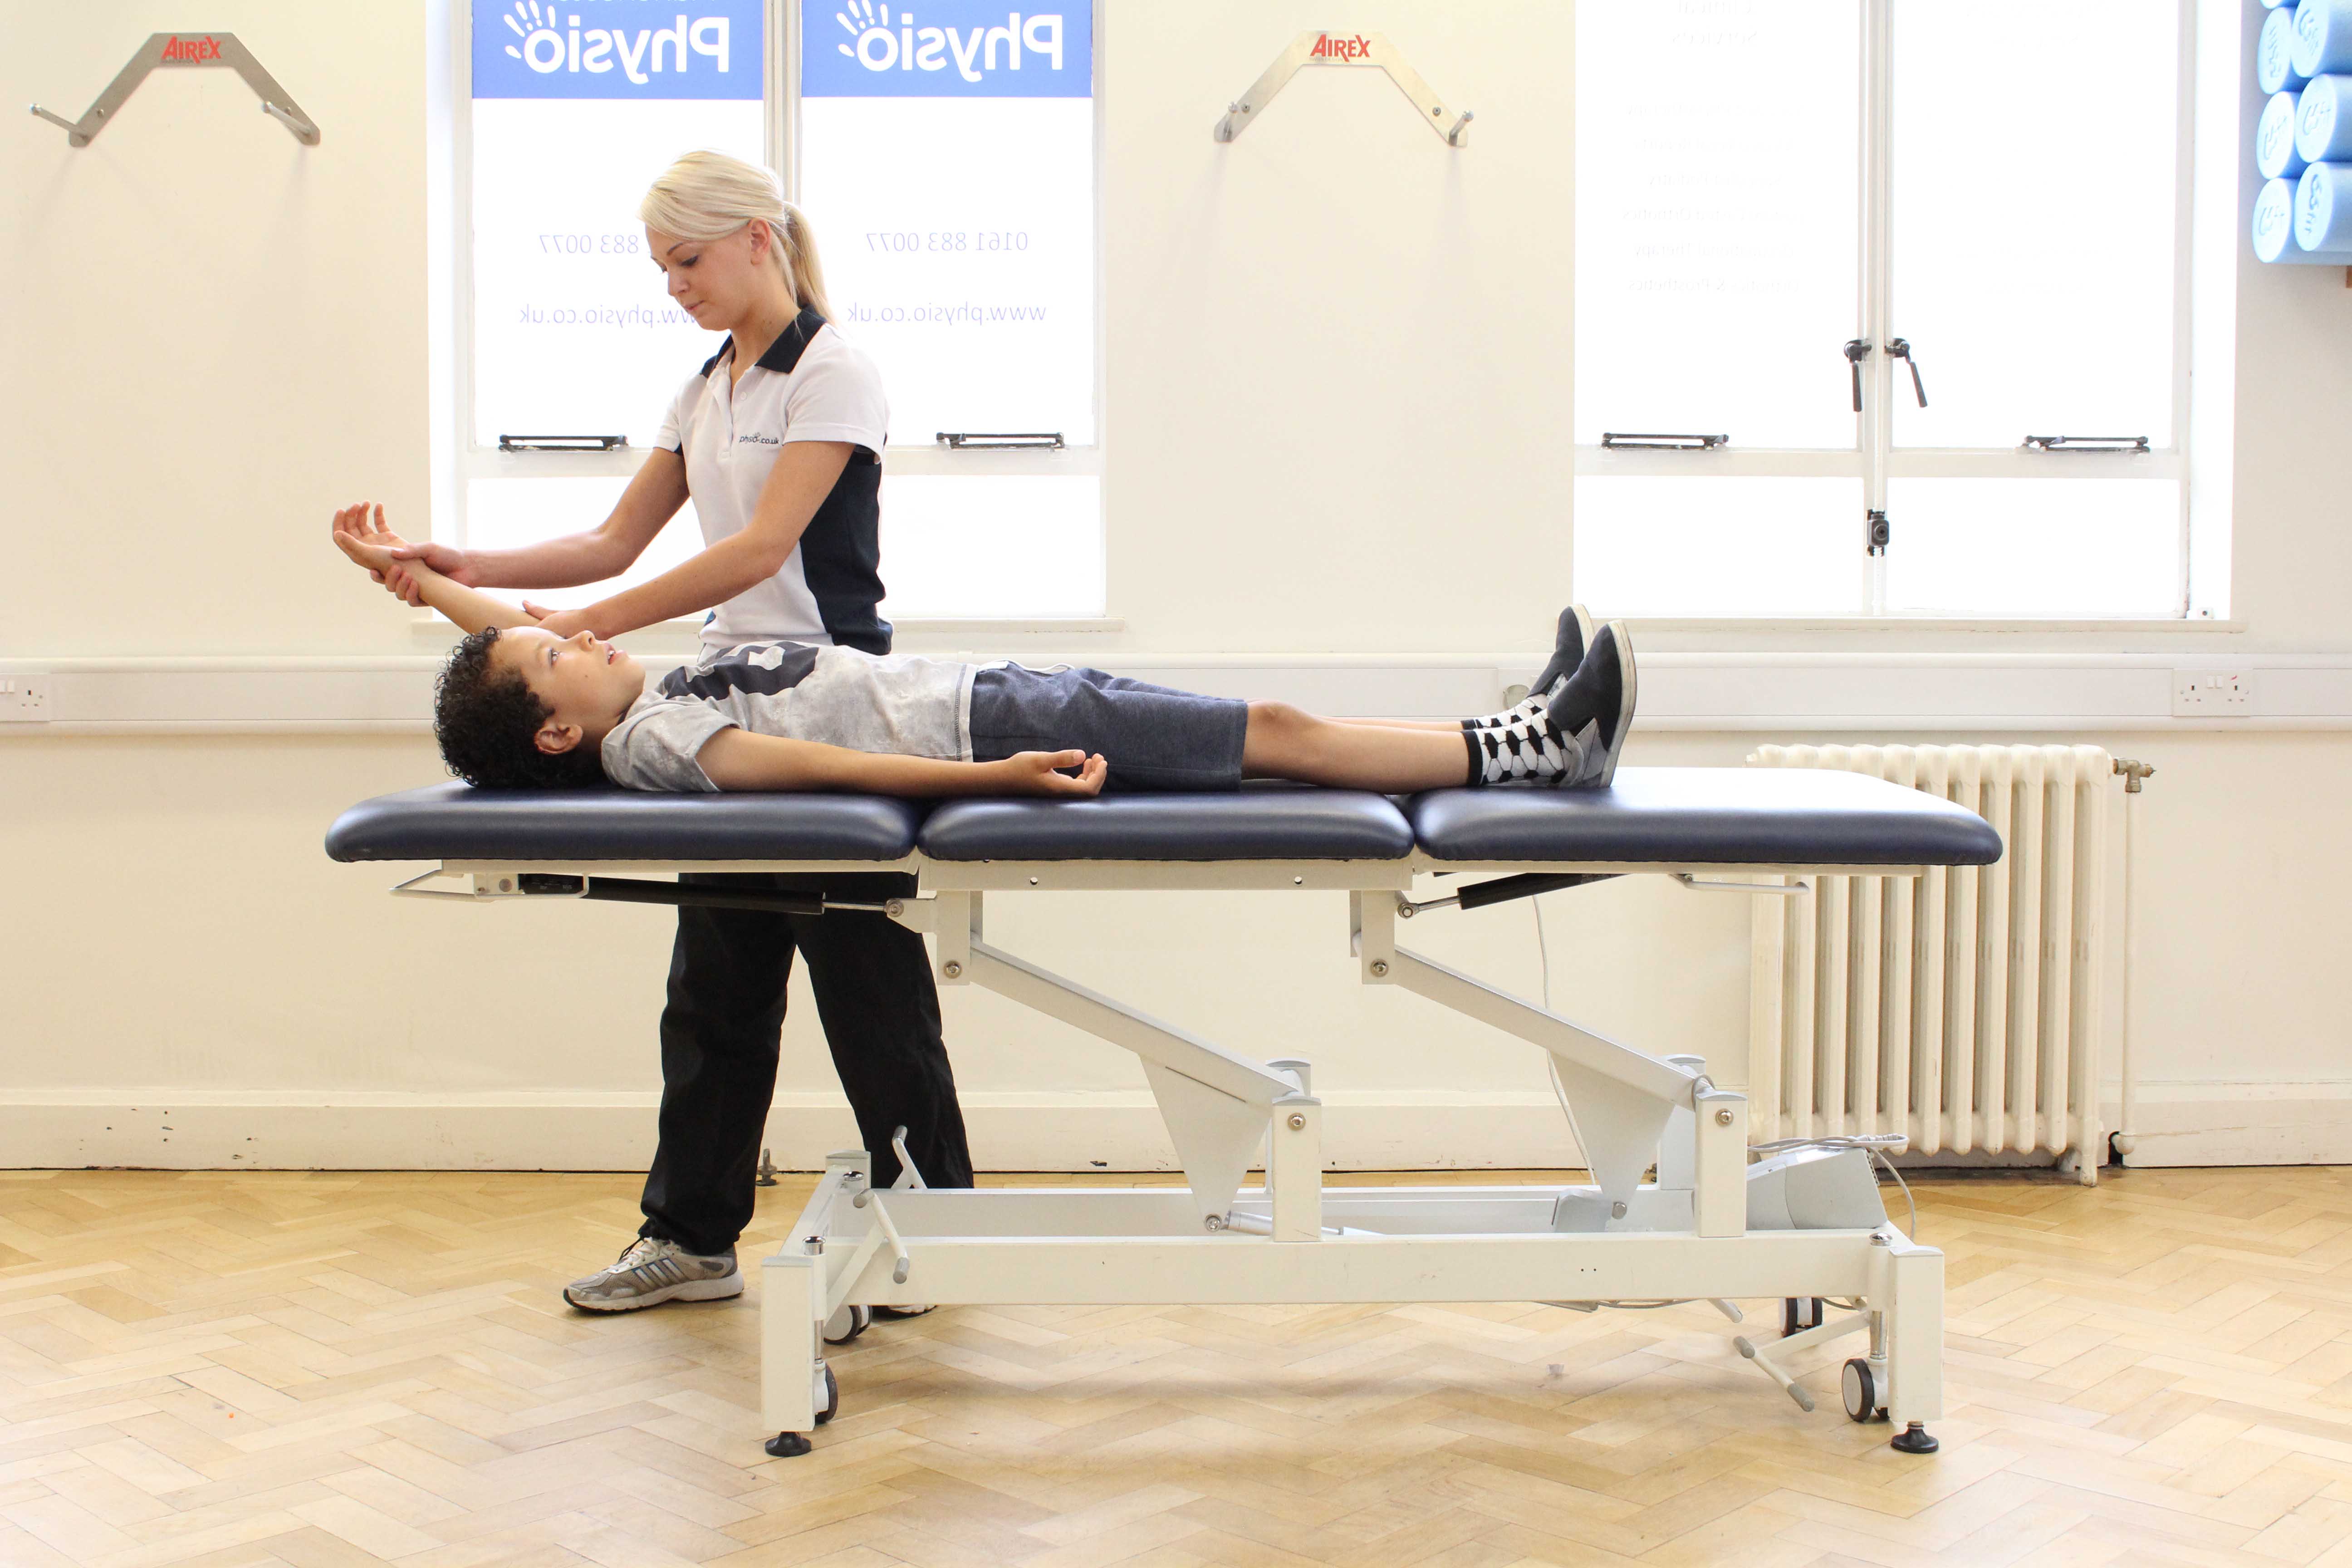 Balance and co-ordination exercises supervised by a paediatric physiotherapist